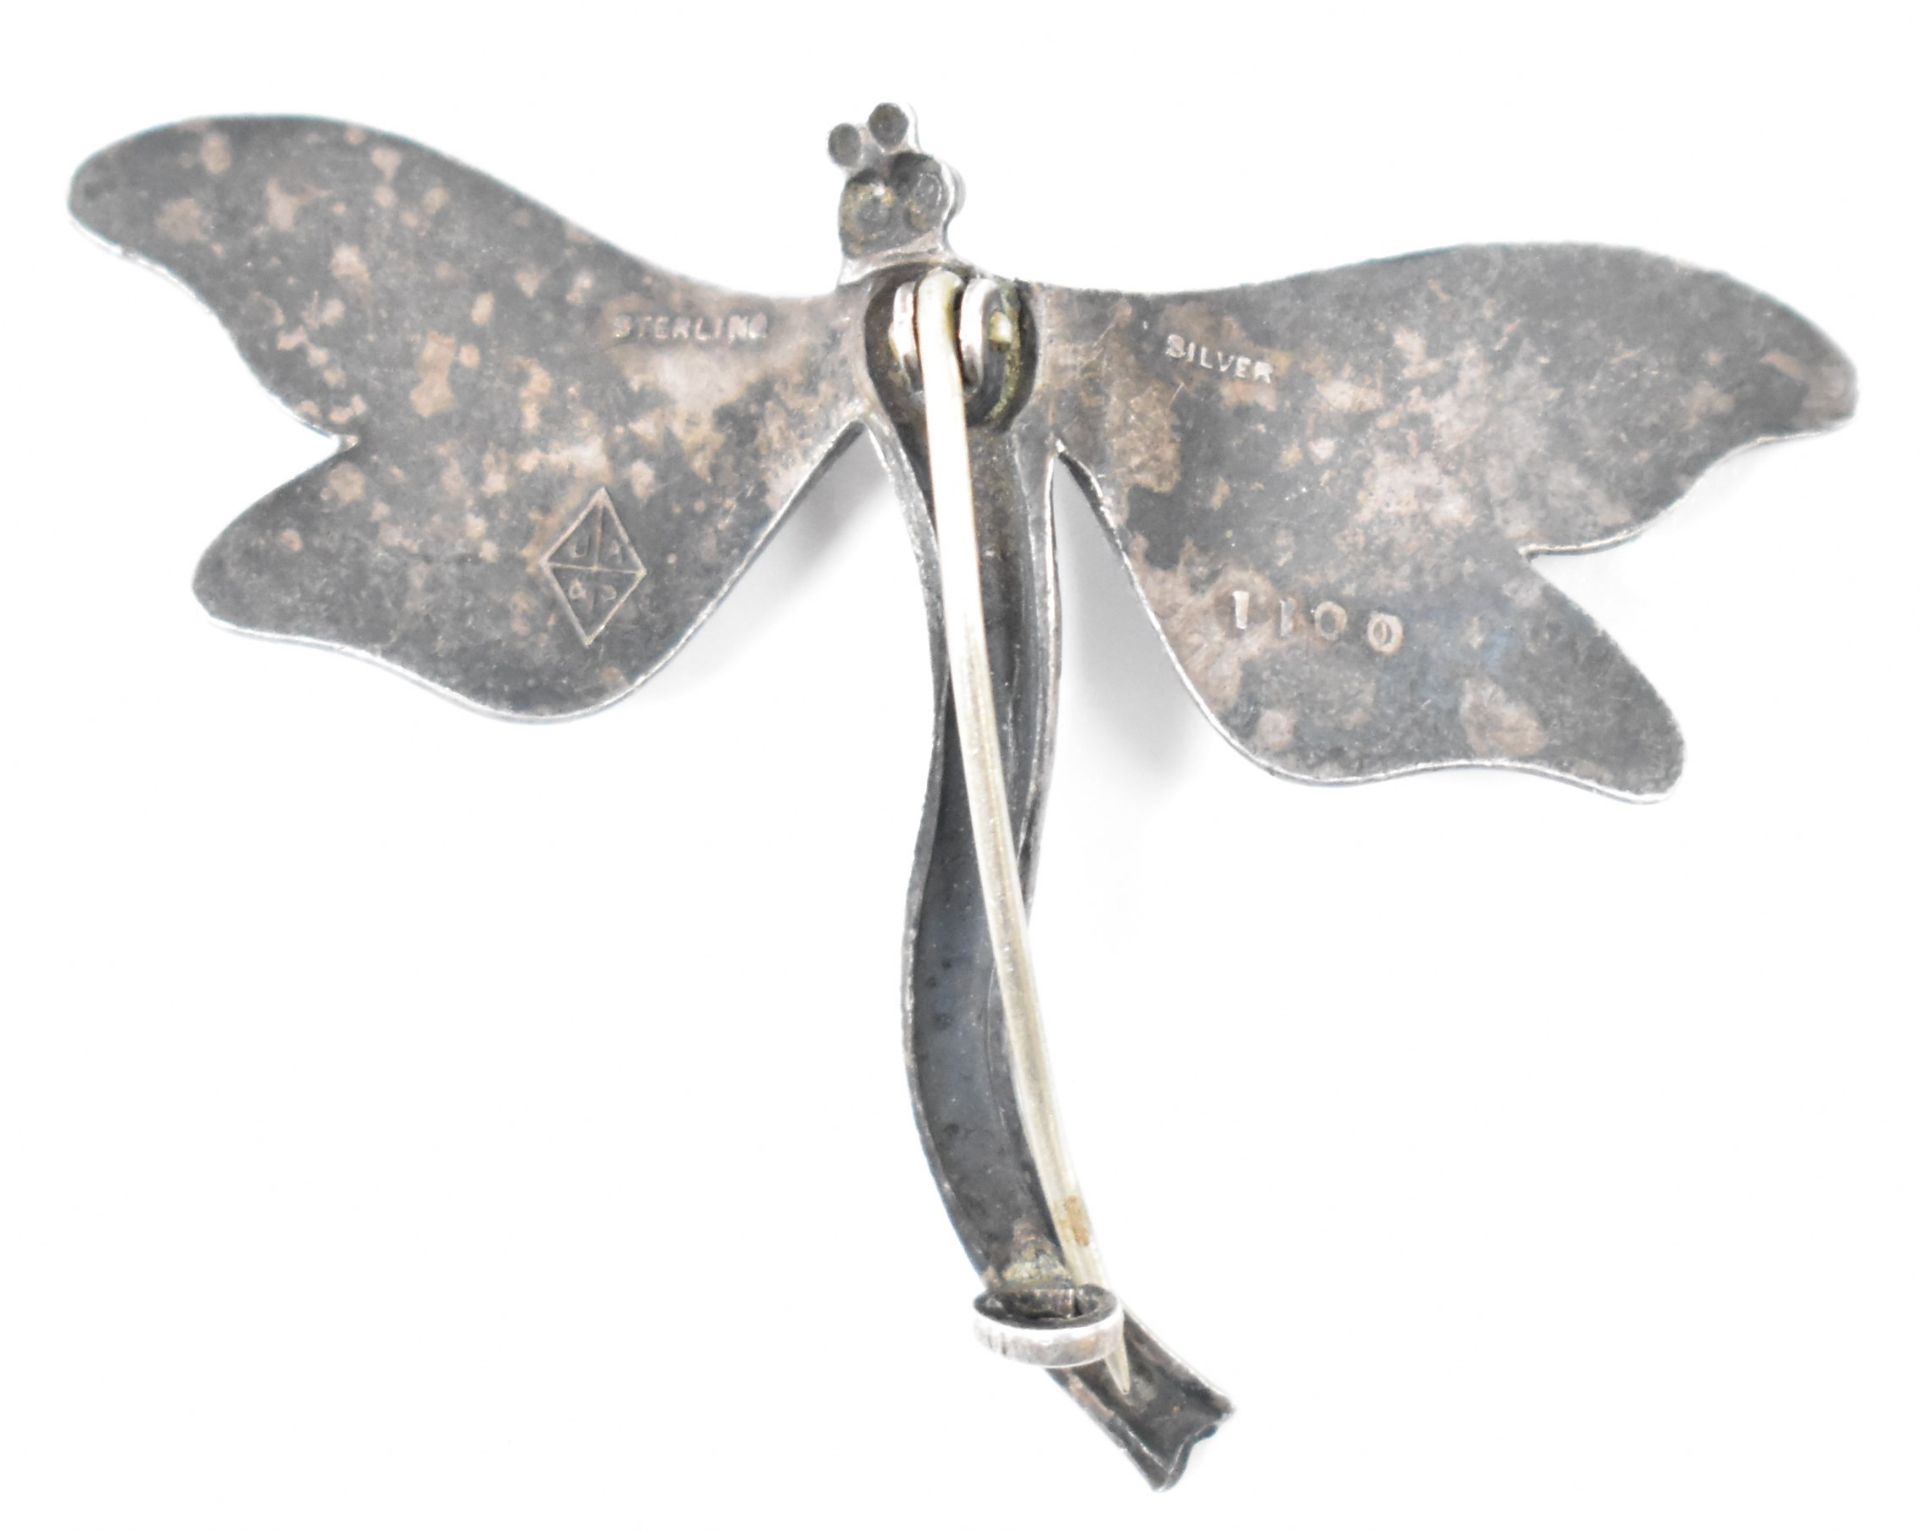 ANTIQUE JOHN AITKIN & SON SILVER ENAMELLED DRAGONFLY BROOCH - Image 3 of 7